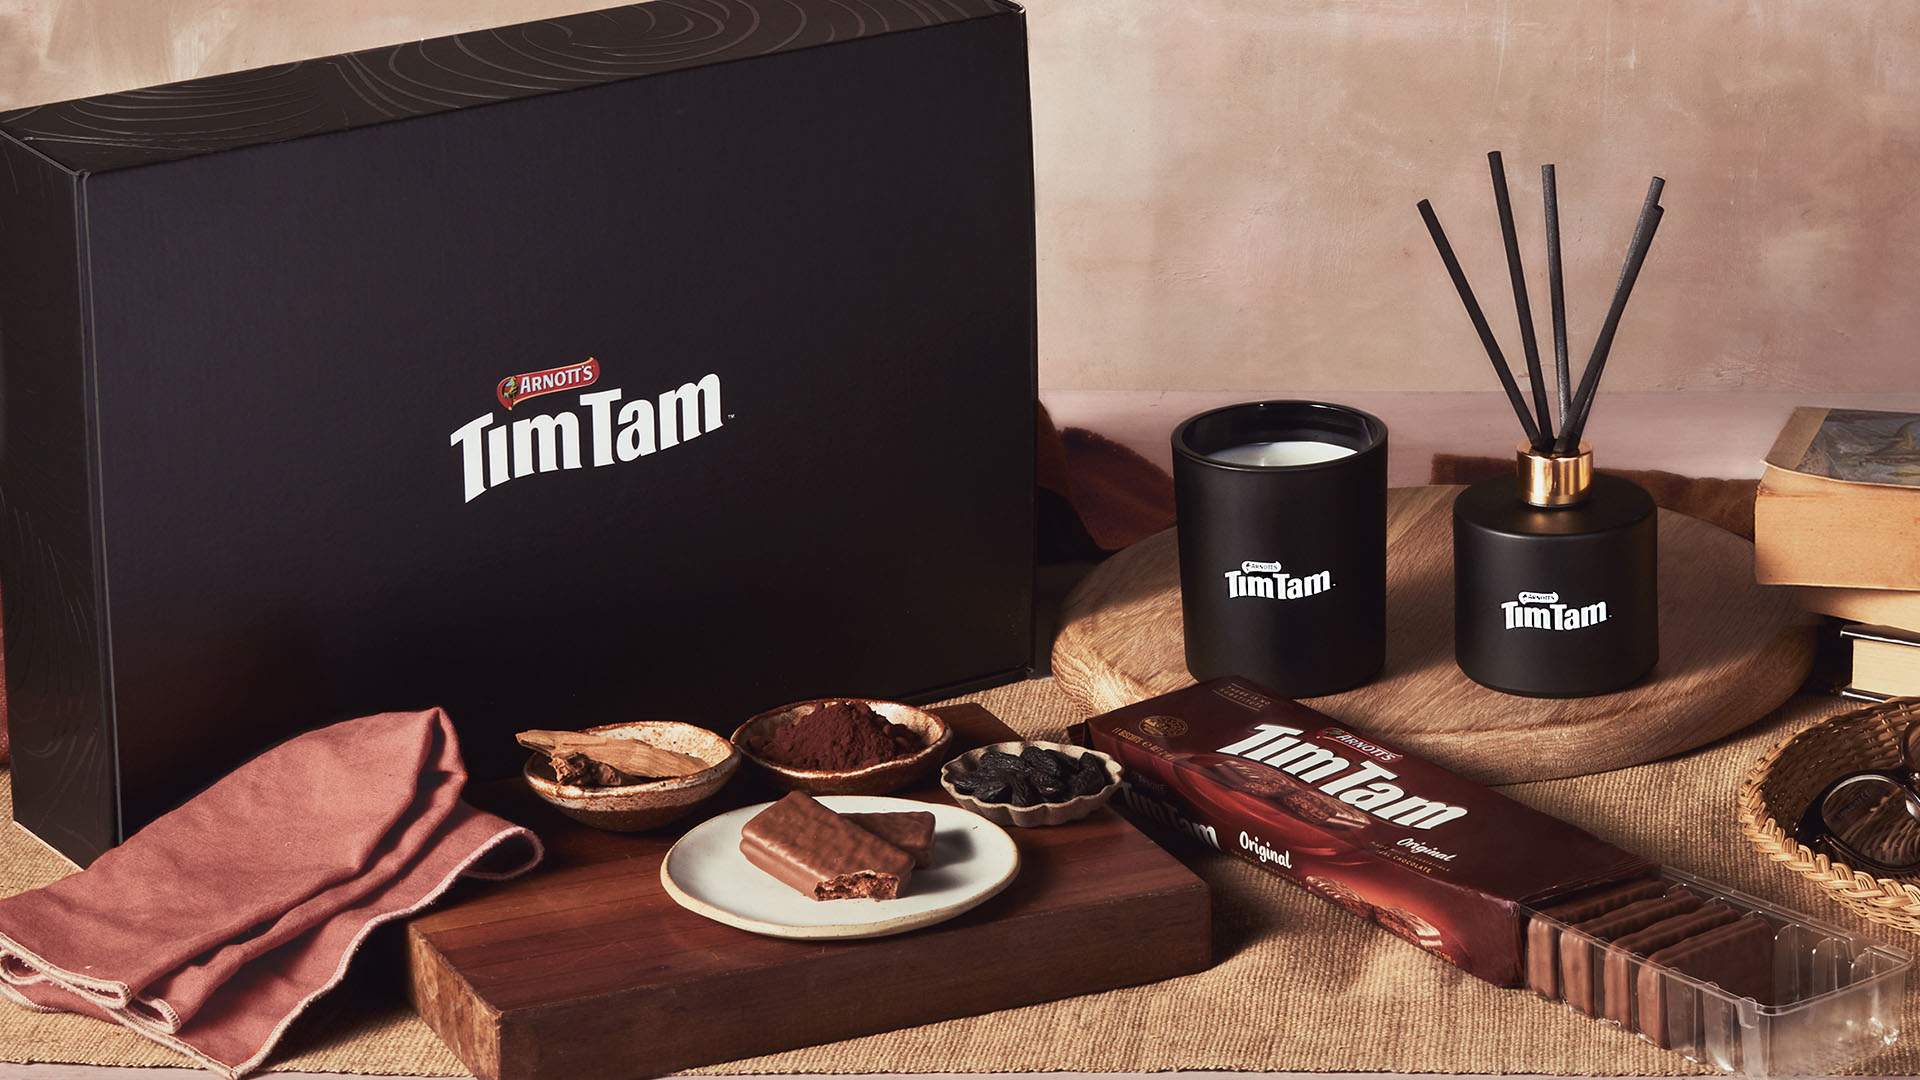 Arnott's Has Released Tim Tam-Scented Candles So Your House Can Smell Like Chocolate Biscuits